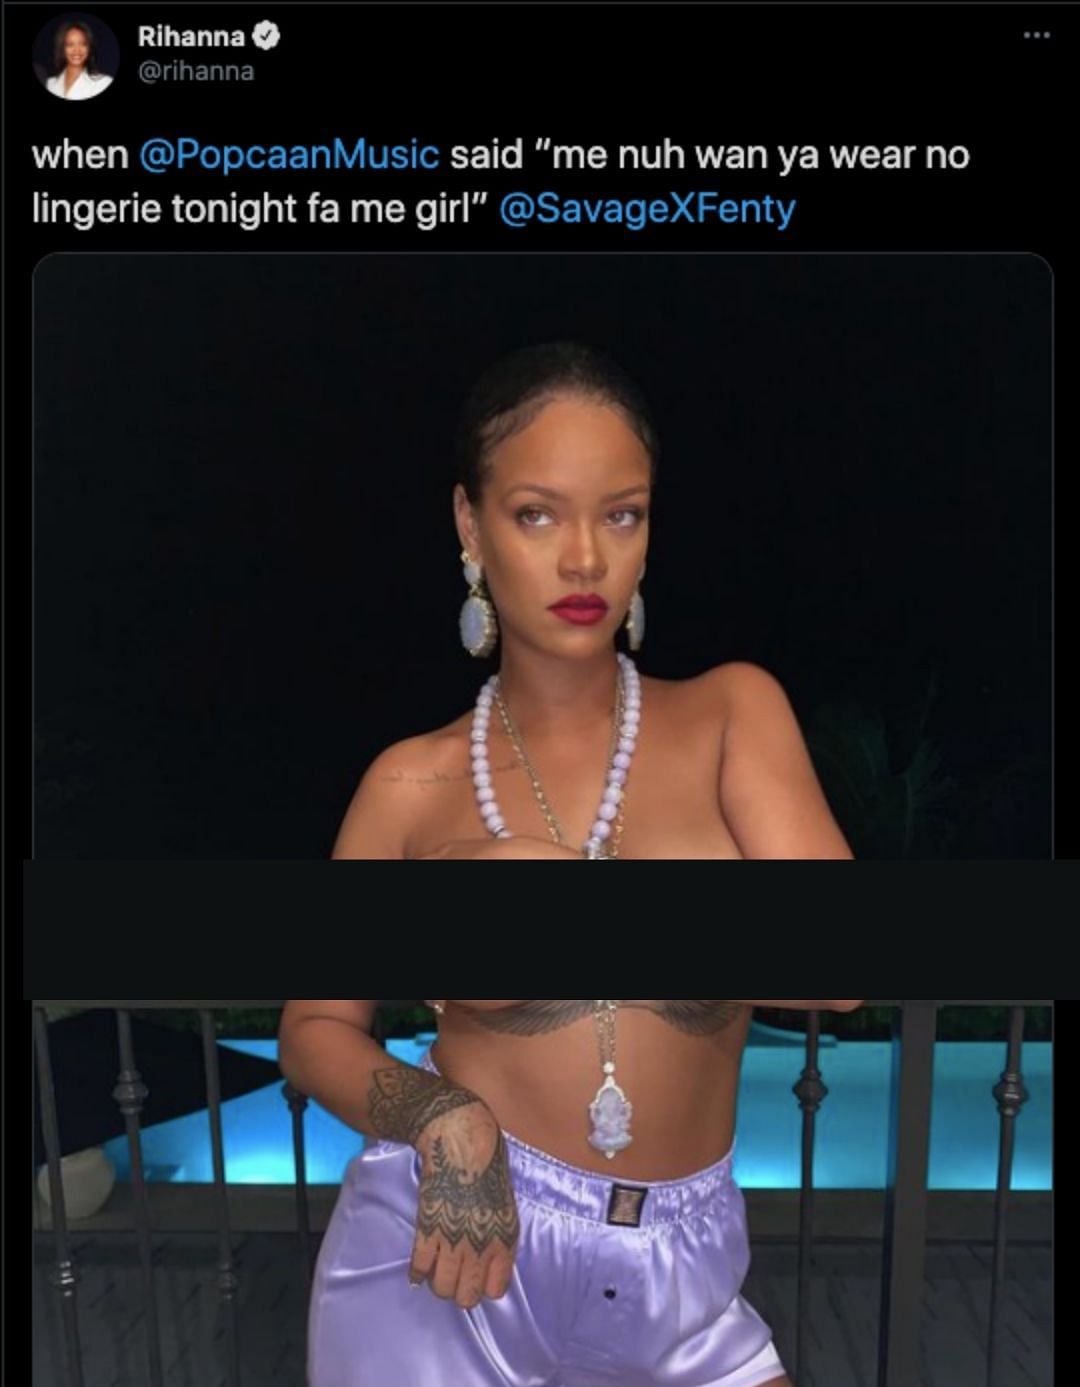 The shoot was for her lingerie brand Savage X Fenty.